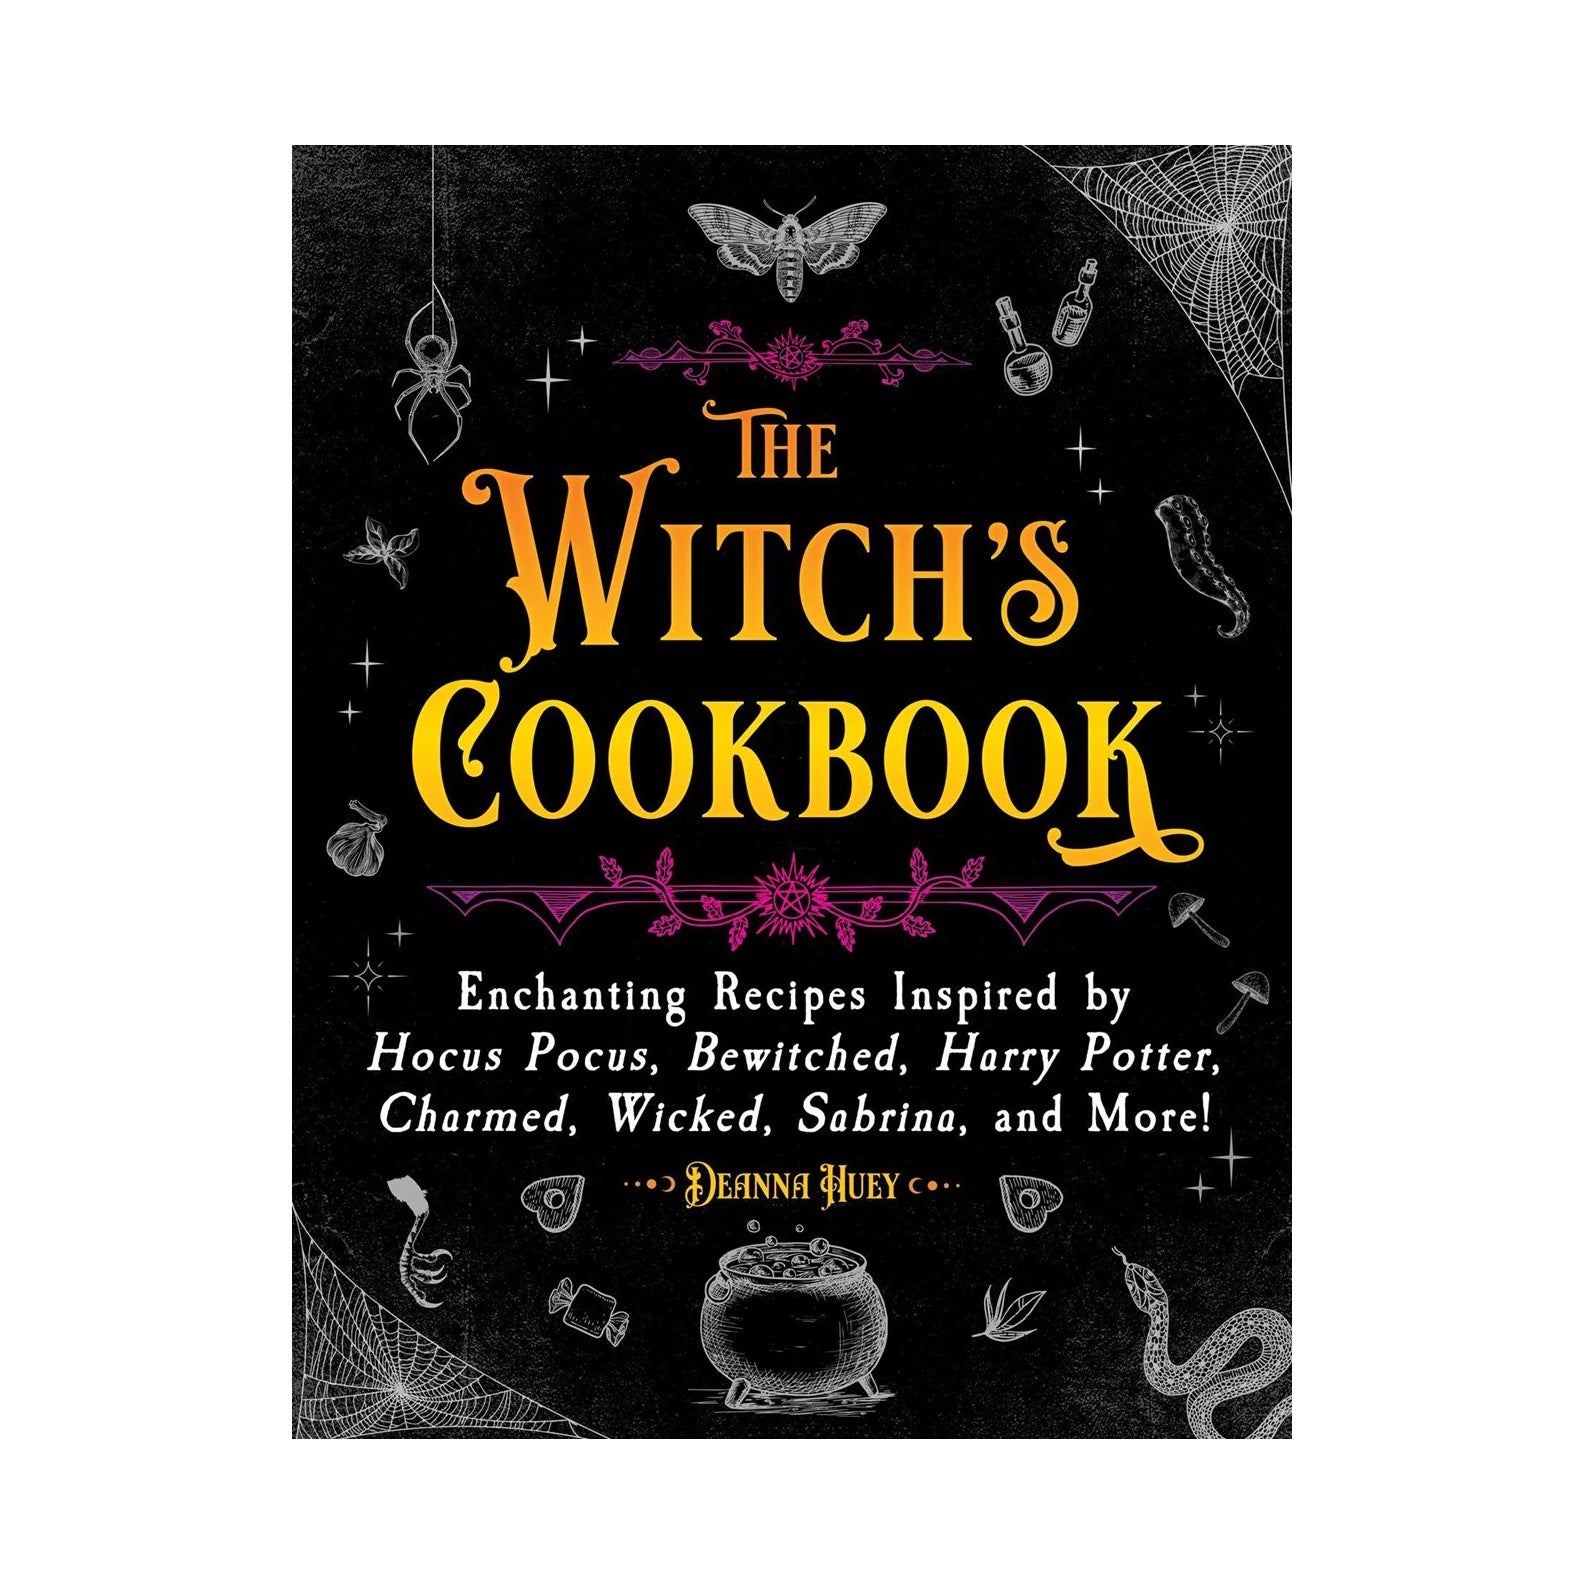 The Witch's Cookbook